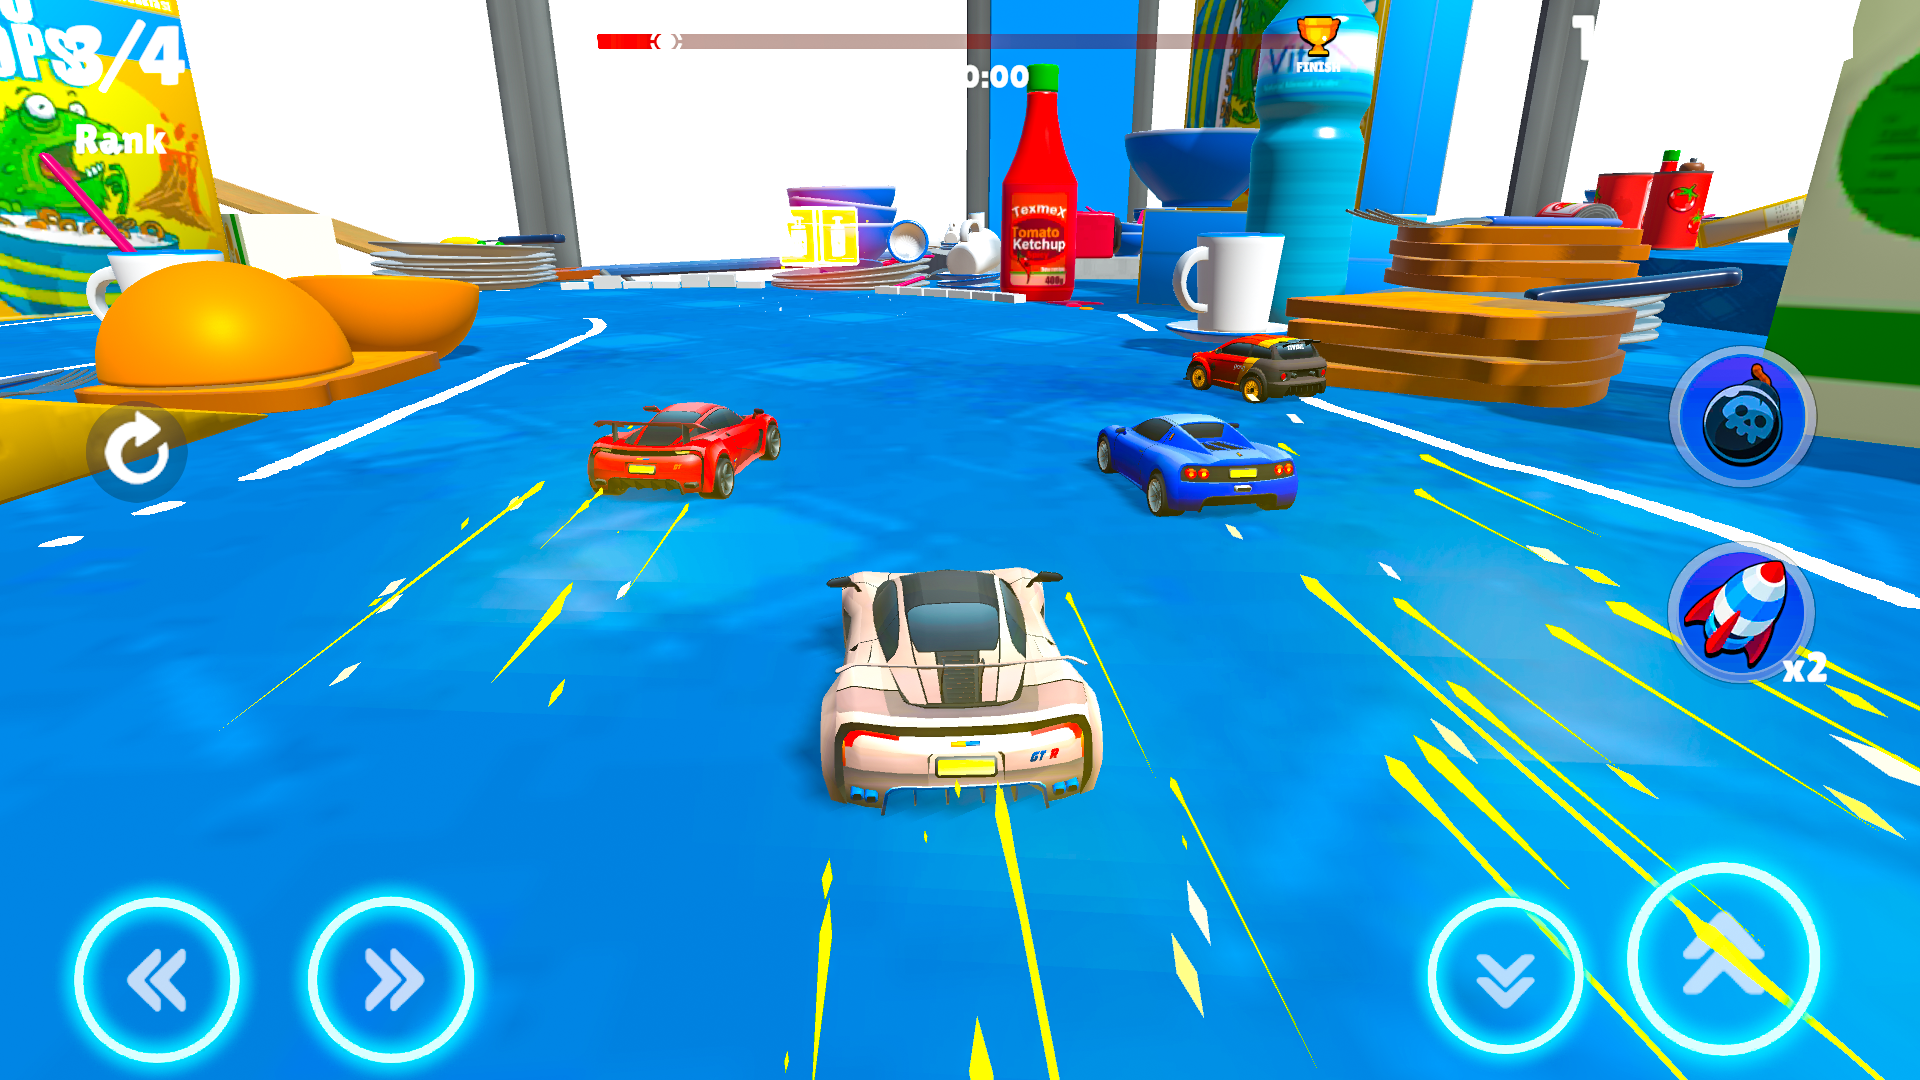 Screenshot 1 of Toy Rider: All Star Racing 2.3